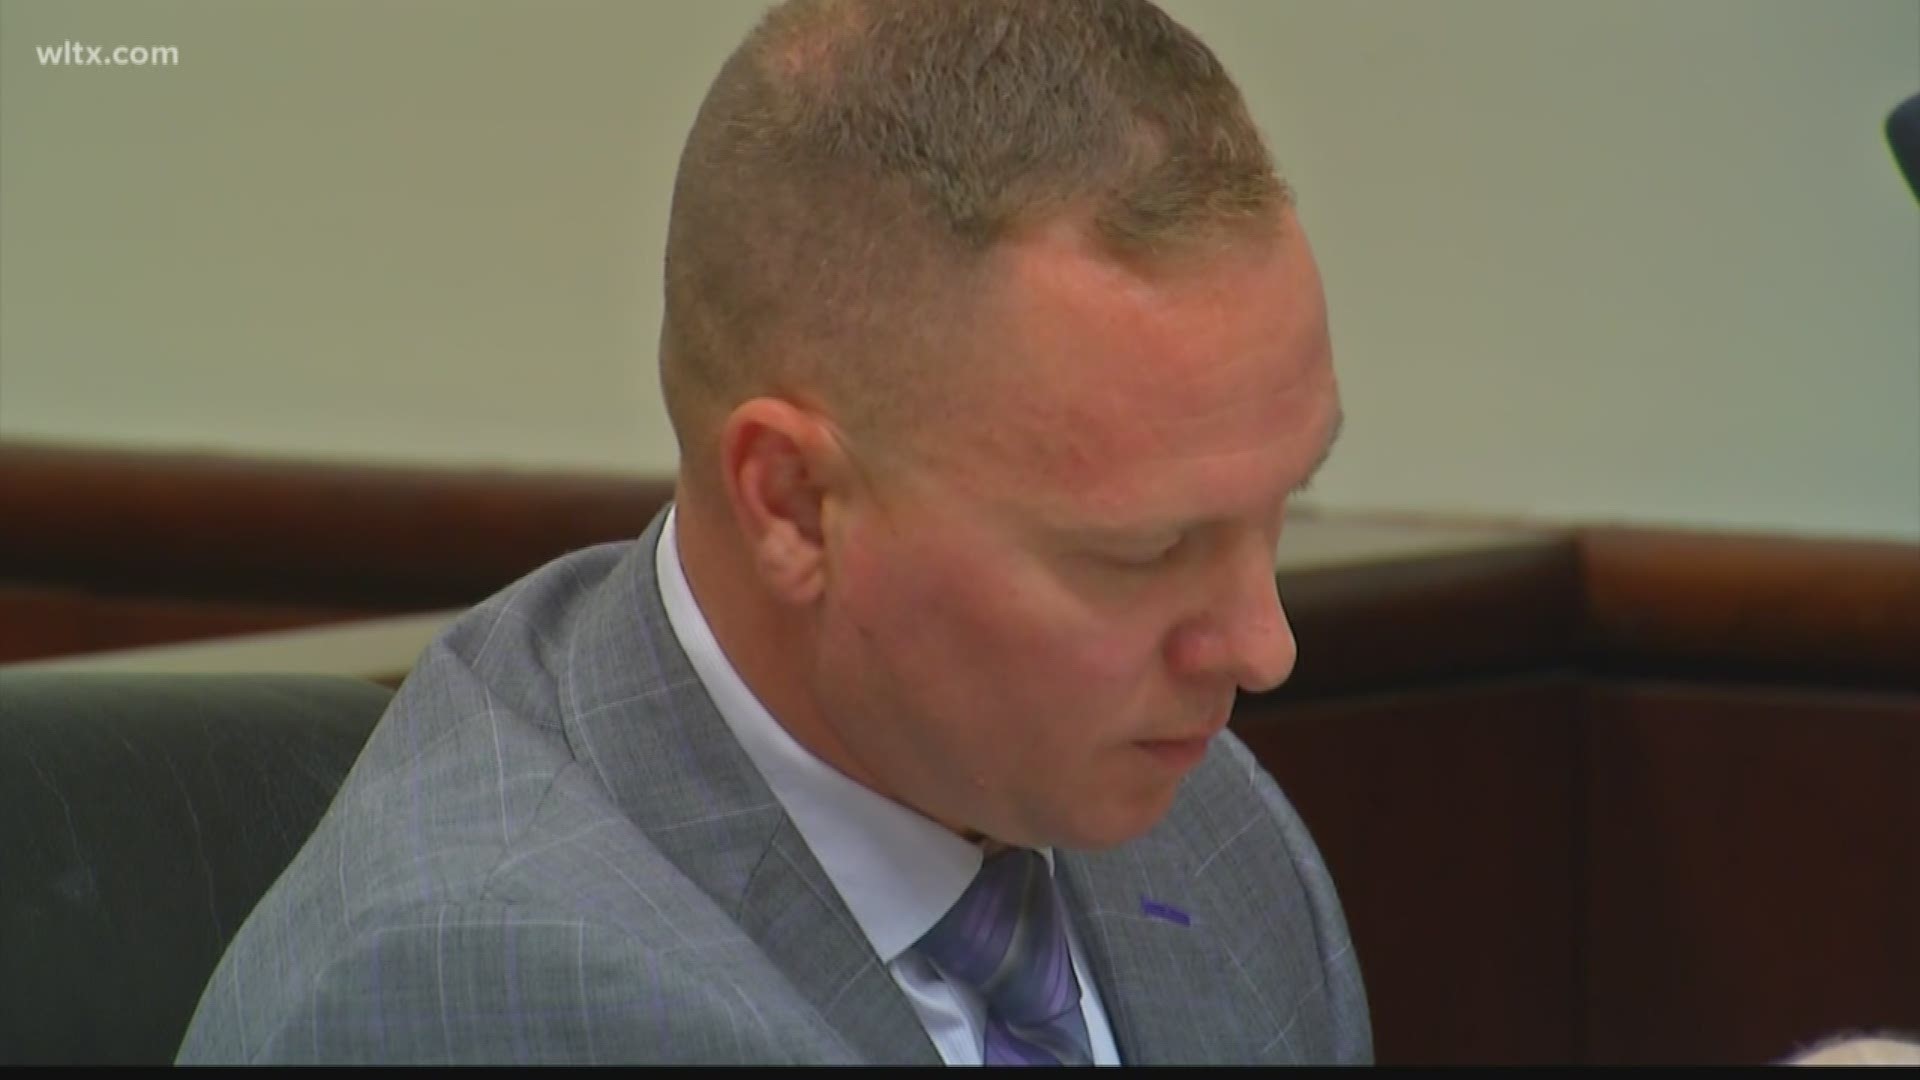 A JUDGE HAS DENIED A SUSPENDED GREENVILLE county SHERIFF'S REQUEST TO HAVE EVIDENCE WITHHELD FROM HIS UPCOMING TRIAL.